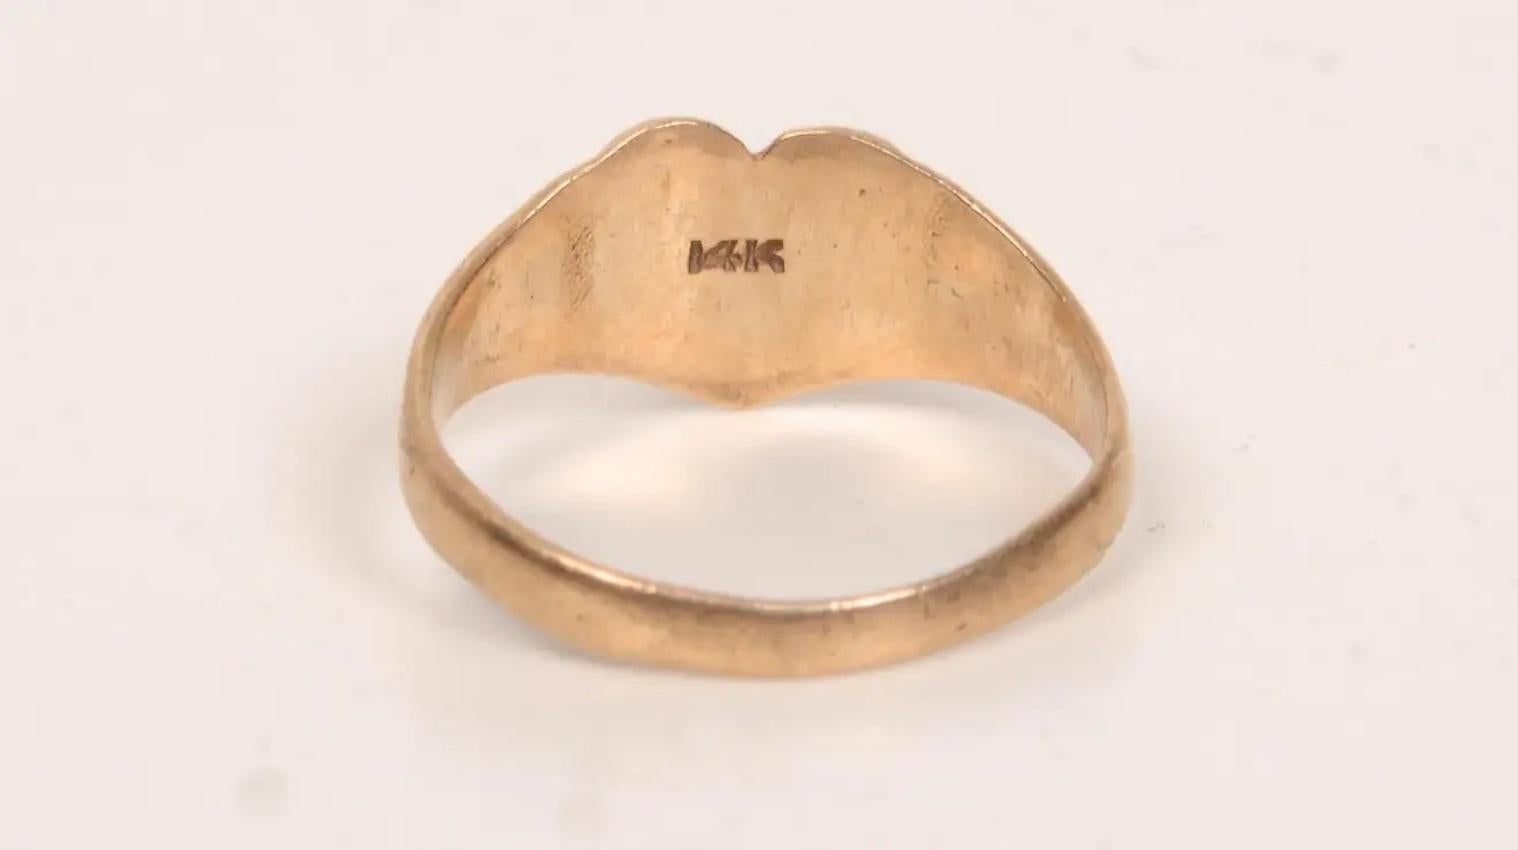 Child's Heart Shaped Signet Ring Marked 14K Yellow Gold. Initialed 